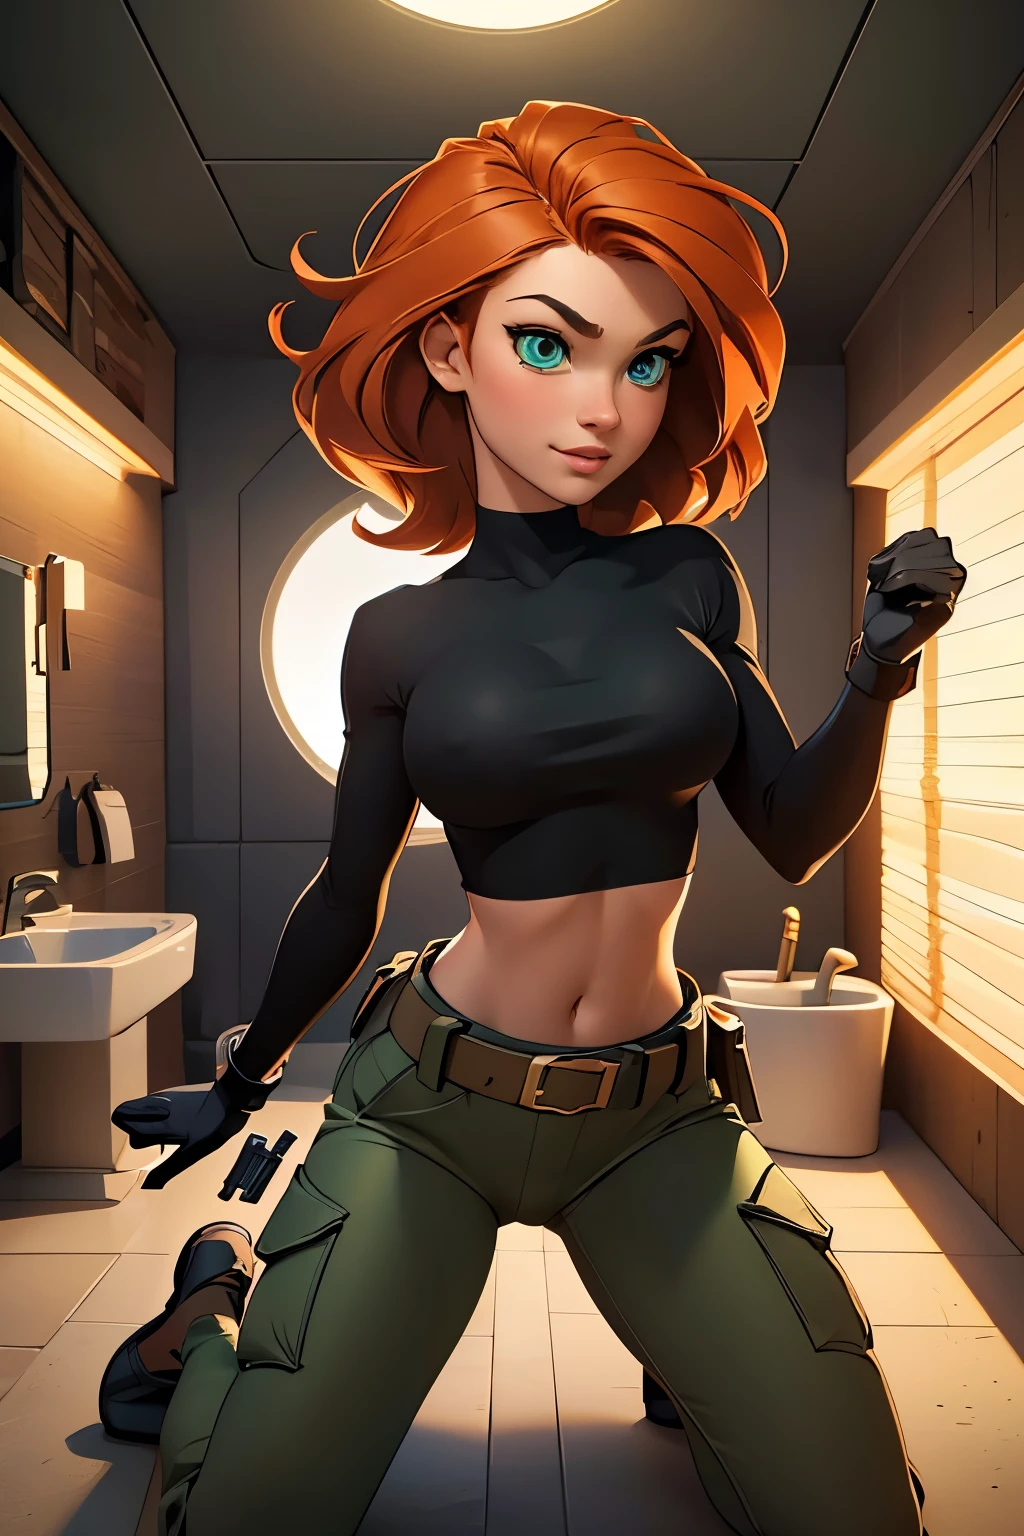 1girl, kneeling pose, in an airplane lavatory, looking up at the viewer, POV, Kim Possible, wearing (Orange-red hair, green eyes, confident expression, black crop top, black gloves, brown belt, green cargo pants:1.1), ((detailed)), ((best quality)), ((masterpiece)), extremely detailed CG unity 8k wallpaper, 32k, focus sharp, photo of perfecteyes eyes, perfecteyes eyes, Masterpiece, raw, beautiful art, professional artist, 8k, very detailed face, very detailed hair, perfectly drawn body, beautiful face, very detailed eyes, smiling, rosey cheeks, intricate details in eyes, perfect fit body, beautiful body, extremely detailed, intricate details, highly detailed, sharp focus, detailed skin, realistic skin texture, texture, detailed eyes, high resolution, kodak vision color, foto_\(ultra\), post-processing, maximum detail, roughness, real life, ultra realistic, photorealism, photography, absurdres, RAW photo, highest quality, high detail RAW color photo, professional photo, extremely detailed UHD 8k wallpaper unit, best quality, highres, (masterpiece, top quality, high resolution:1.4), photo, cinematic, film grain, sharp, soft natural light, magic photography, super detailed, anatomically correct, perfect anatomy, cameltoe.